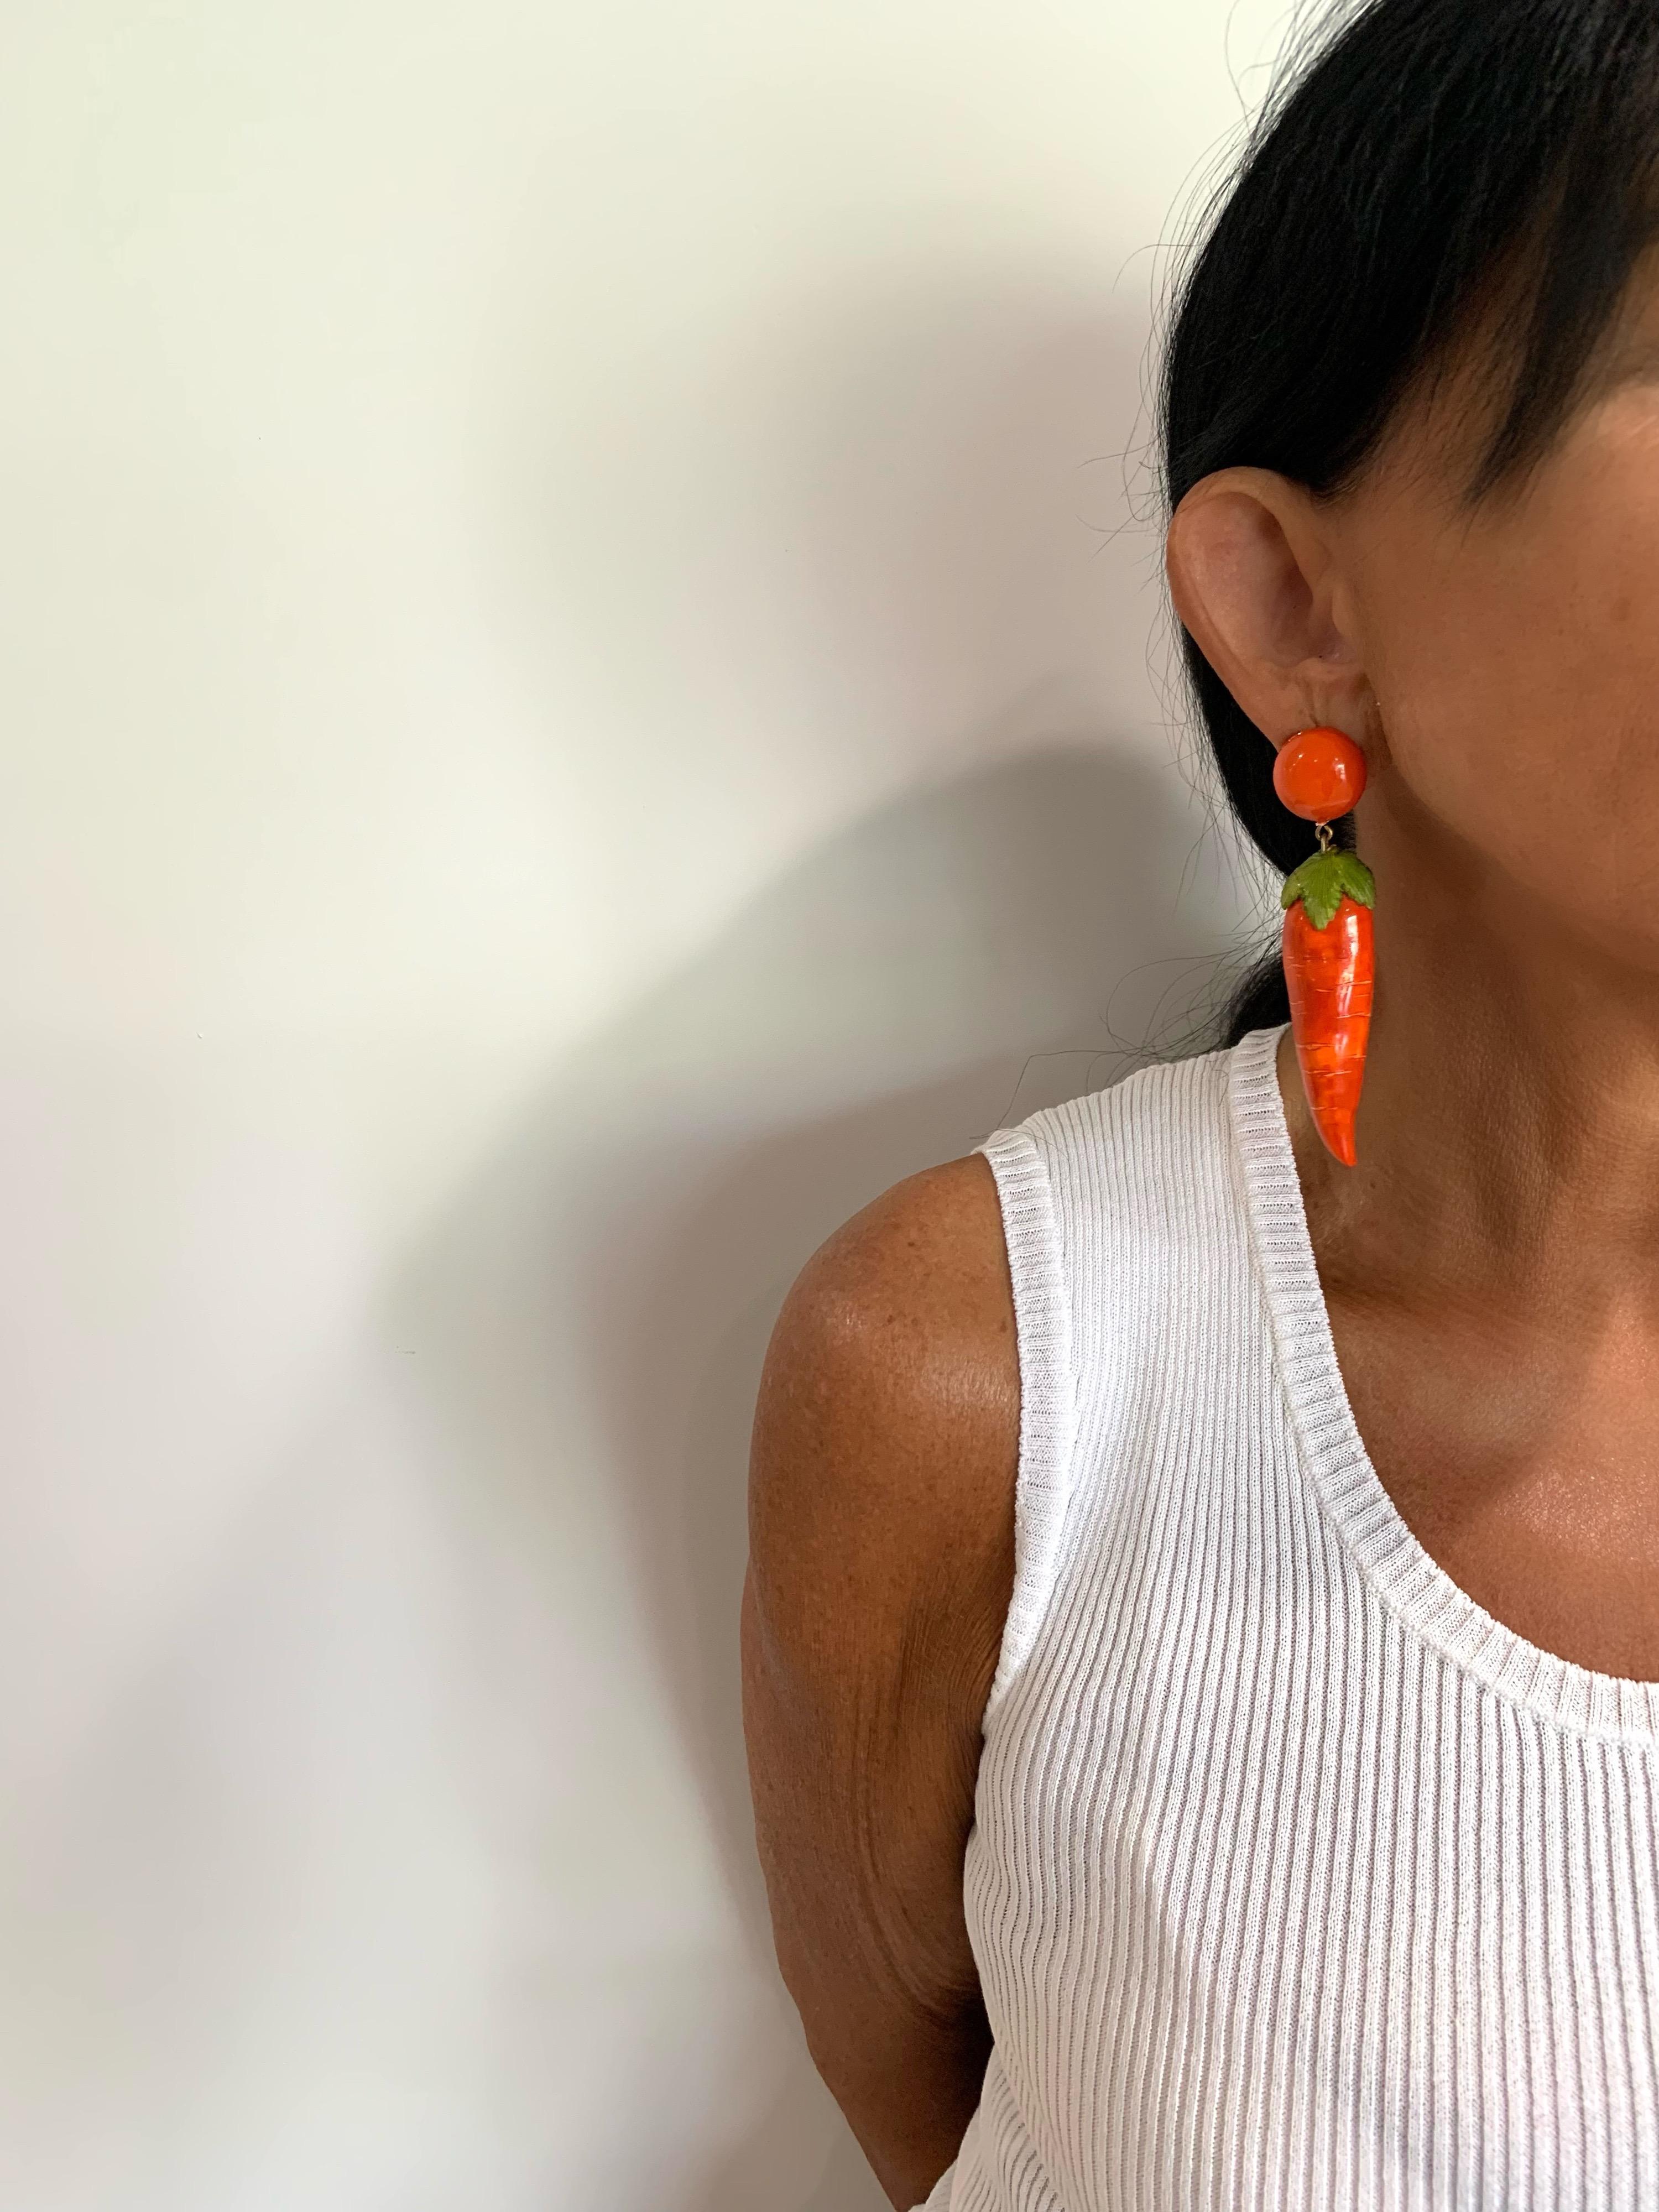 XL contemporary limited production carrot statement earrings handcrafted by Cilea Paris.